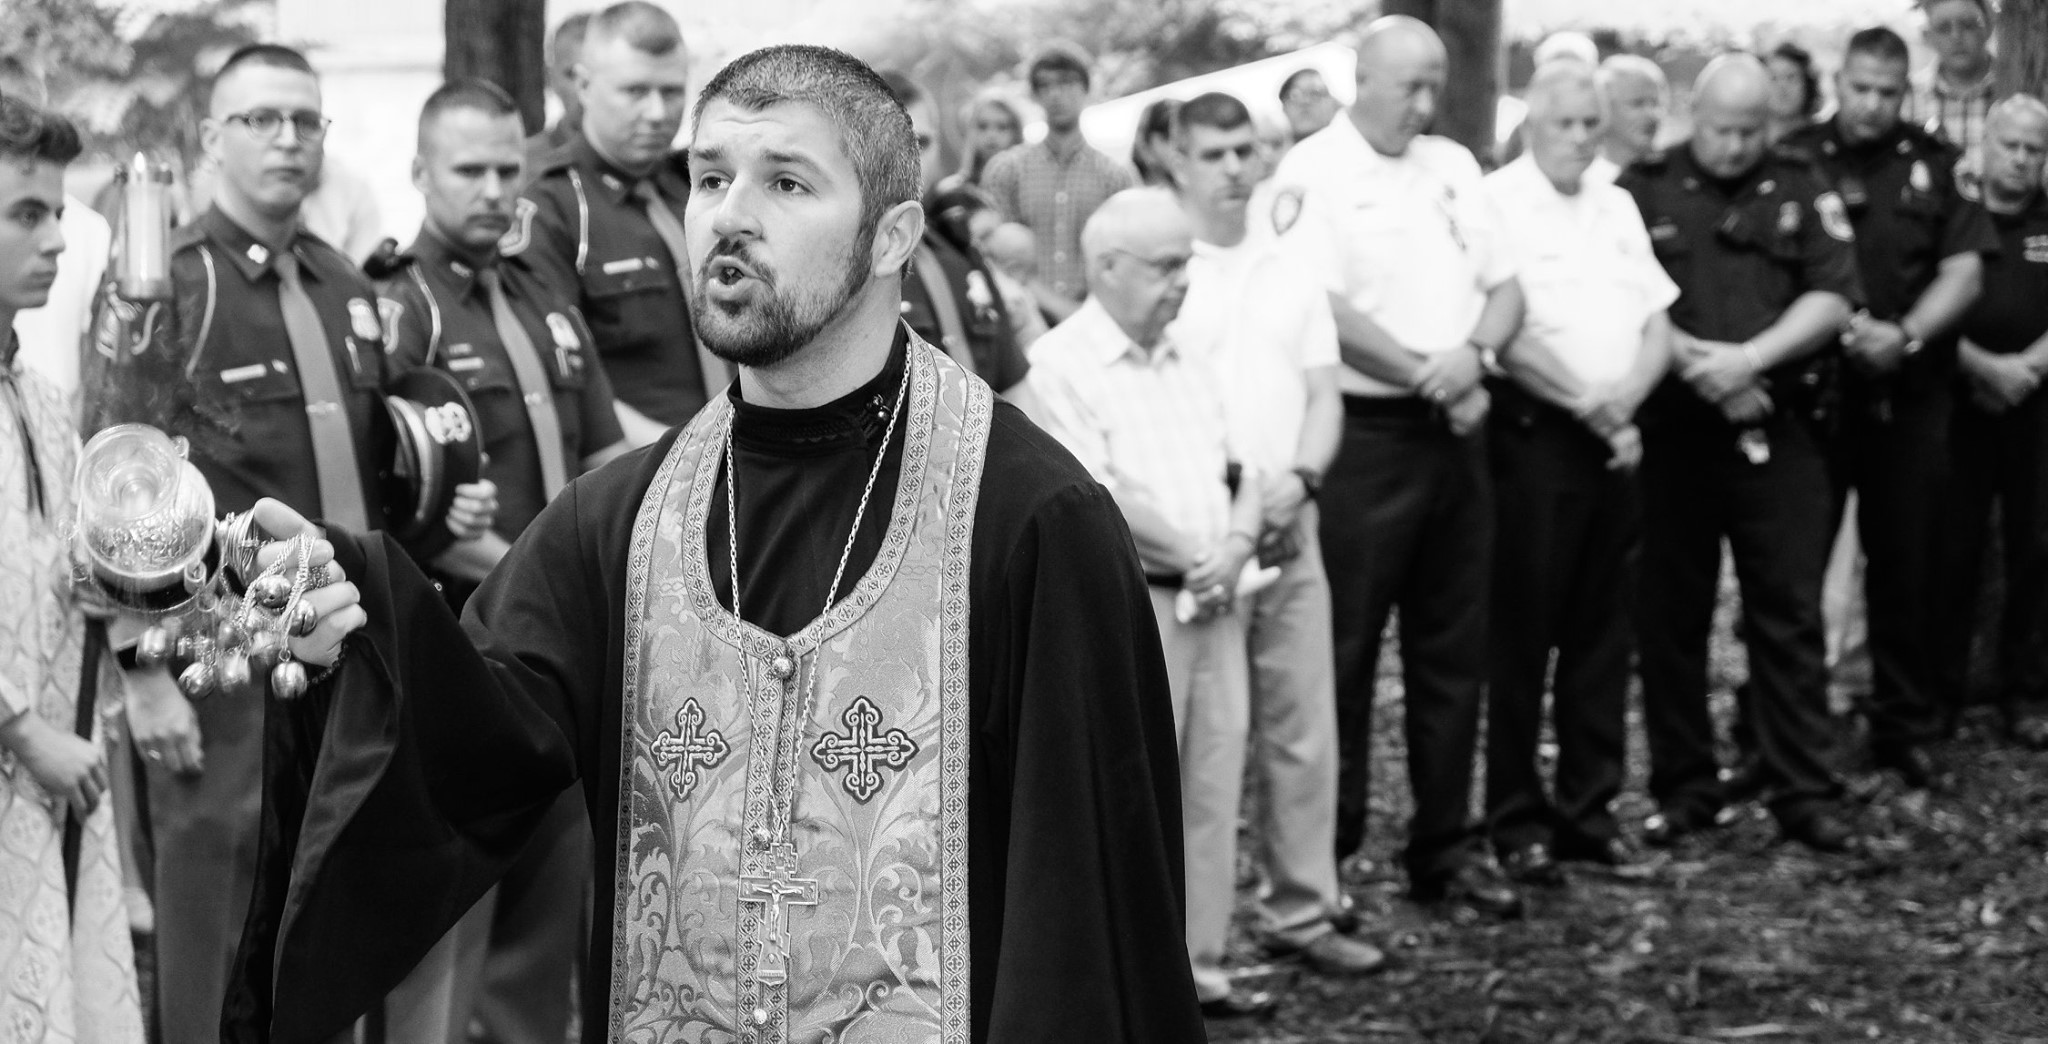  priest censing and praying with first responders in background black and white 